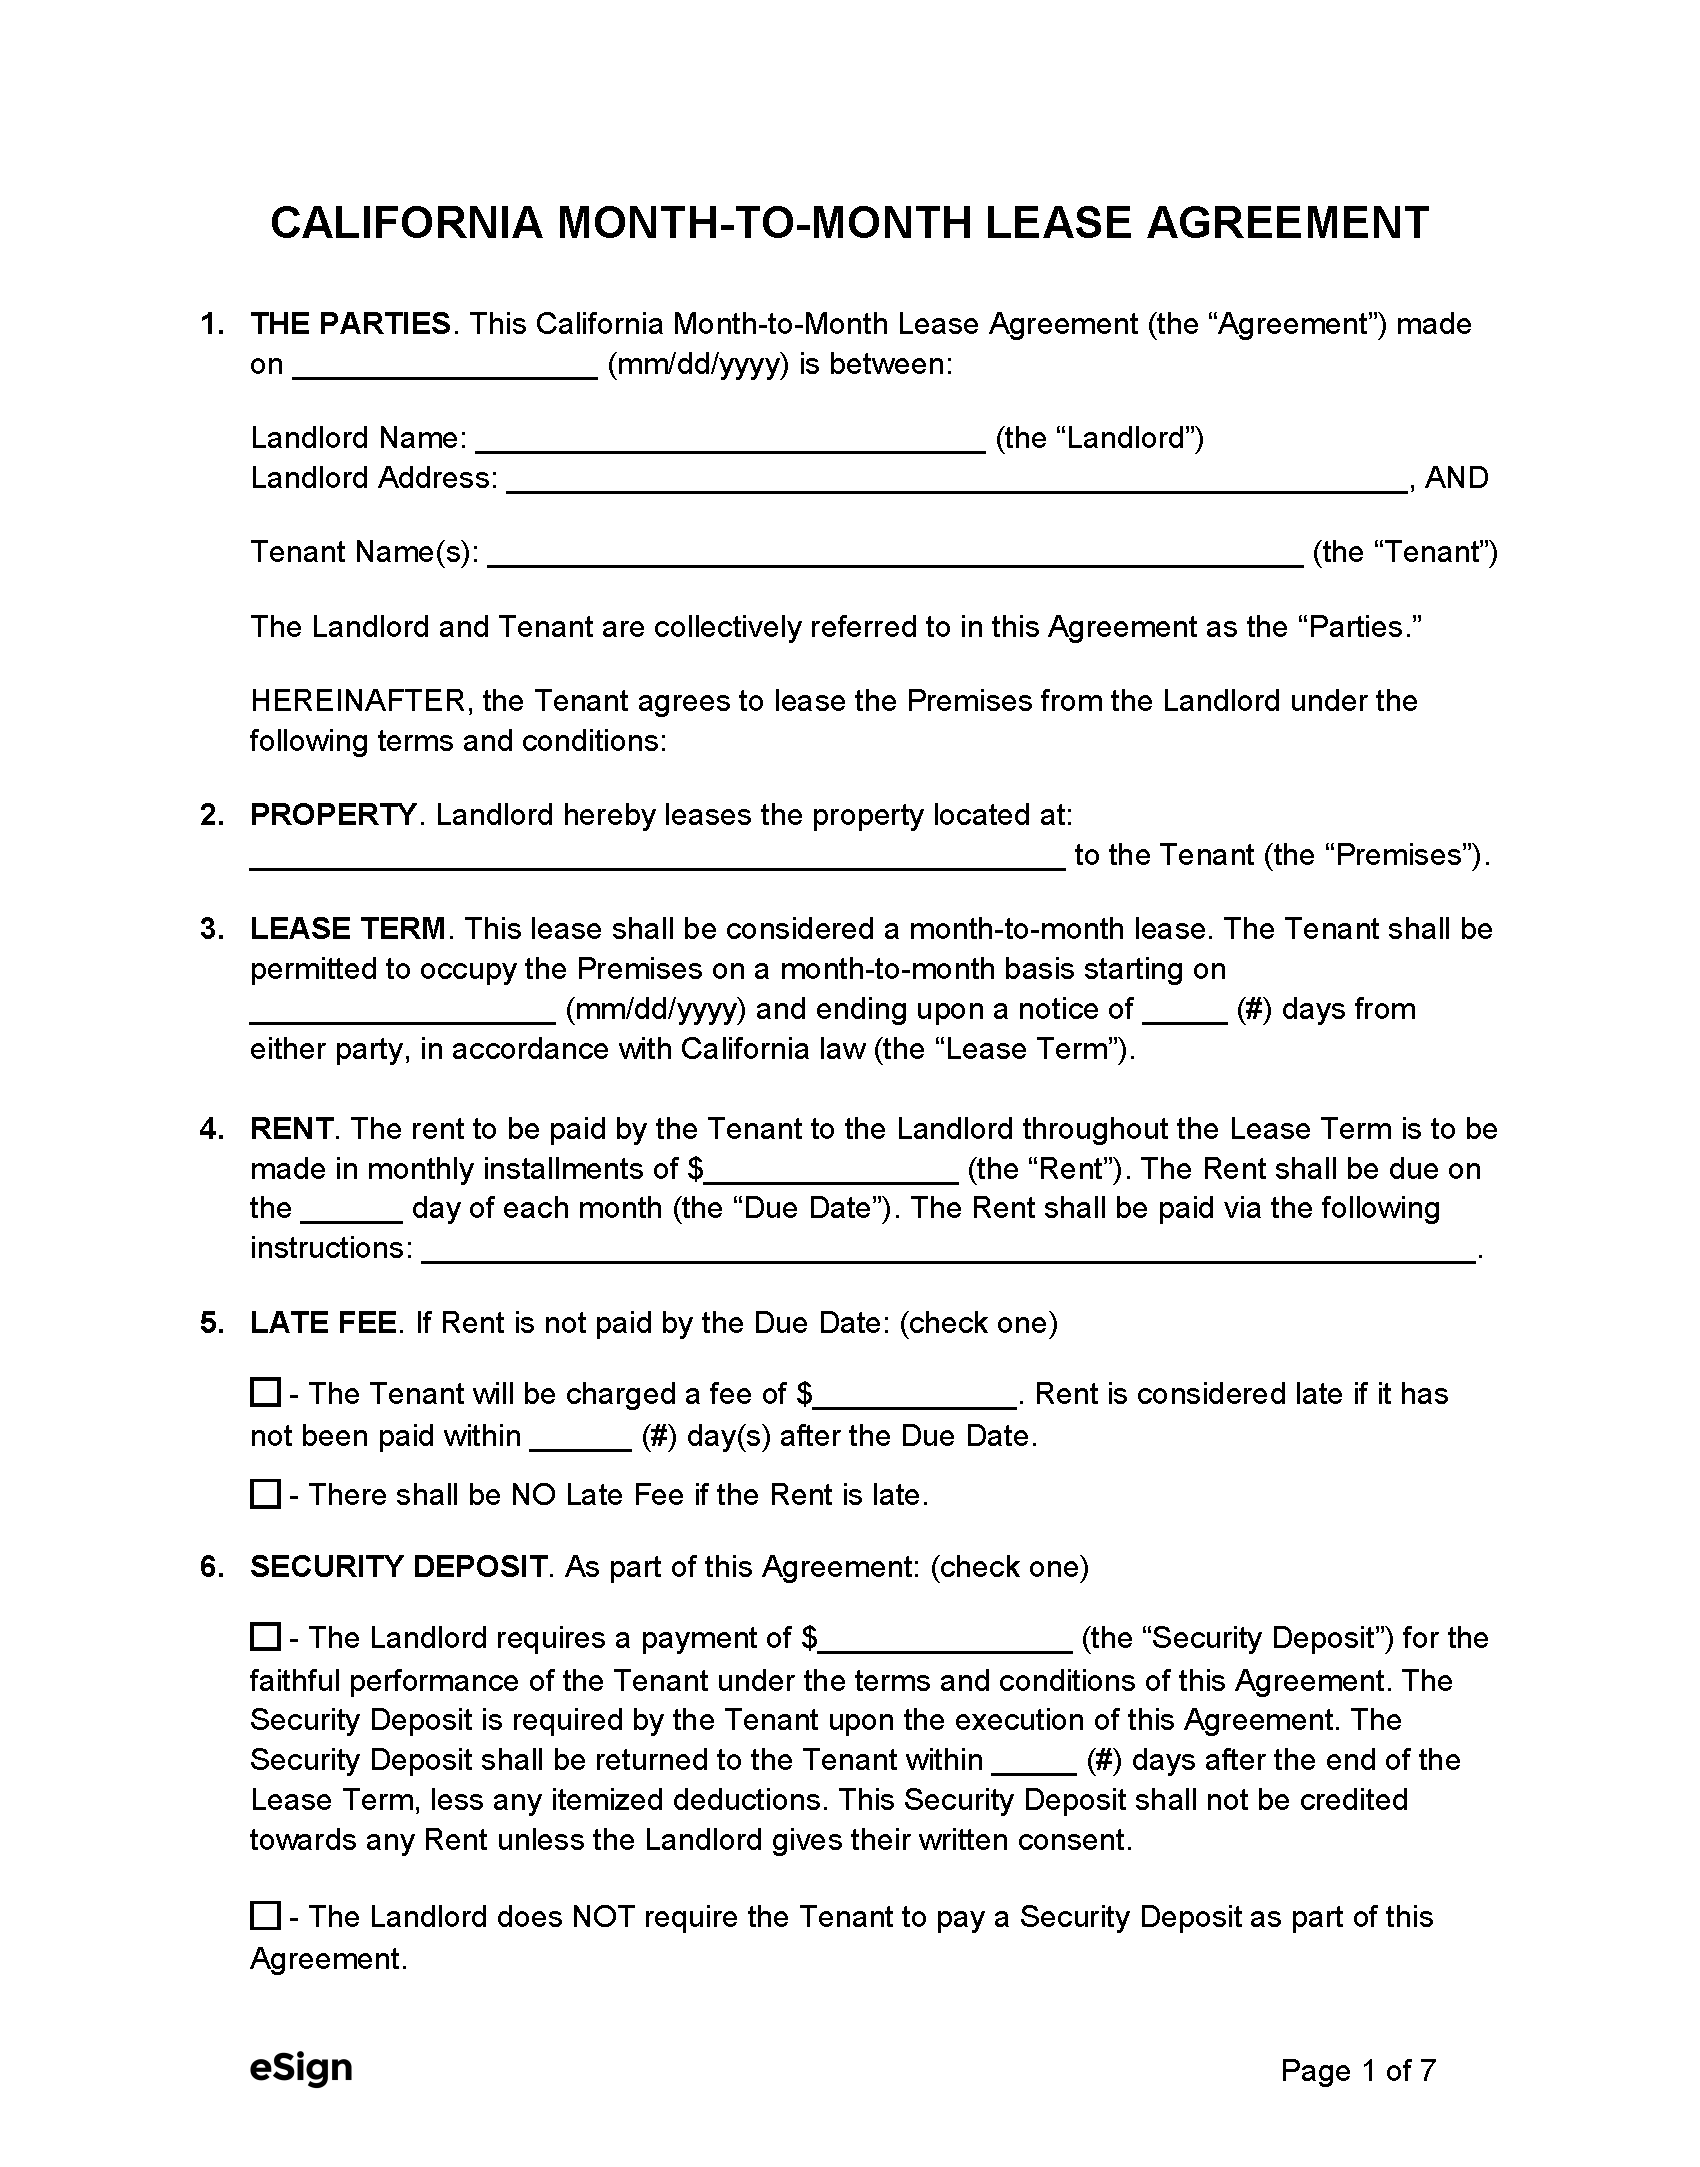 free-california-month-to-month-lease-agreement-template-pdf-word